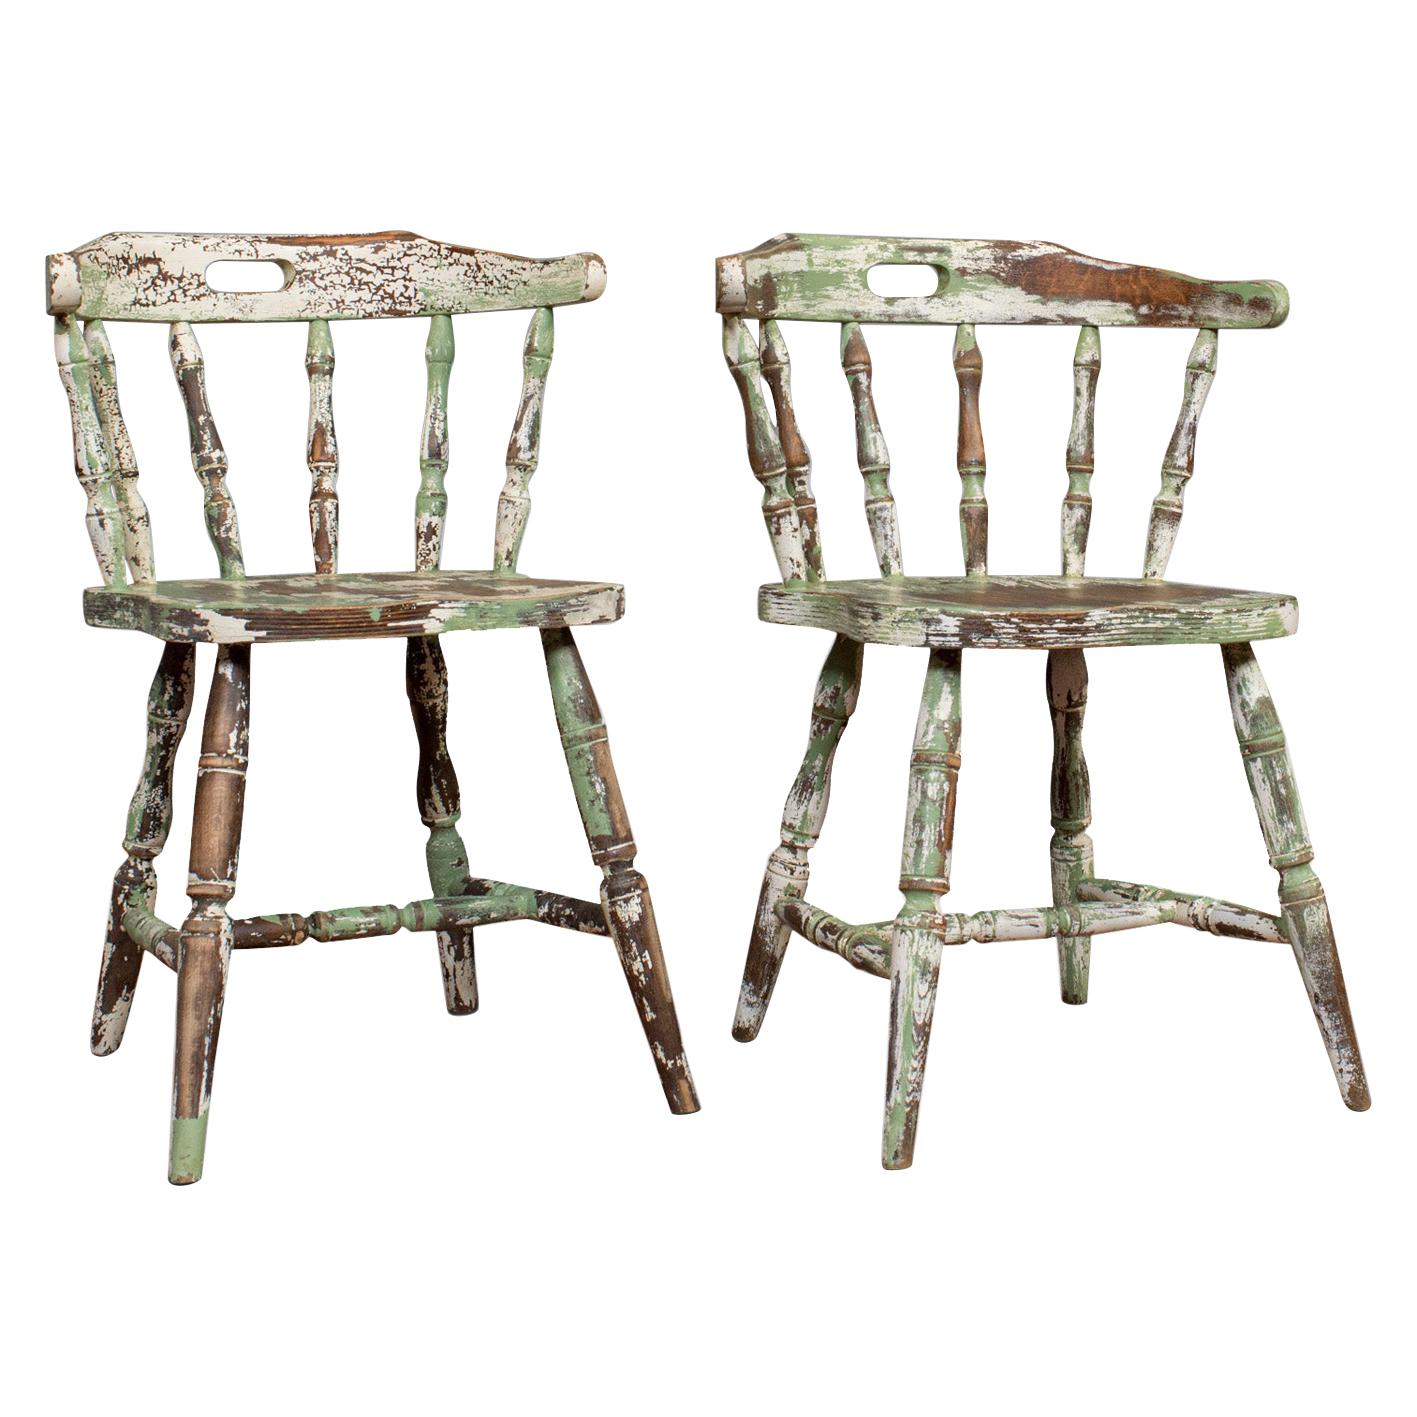 Pair of Antique Windsor Chairs, French, Beech, Bow Back Chair, Late 19th Century